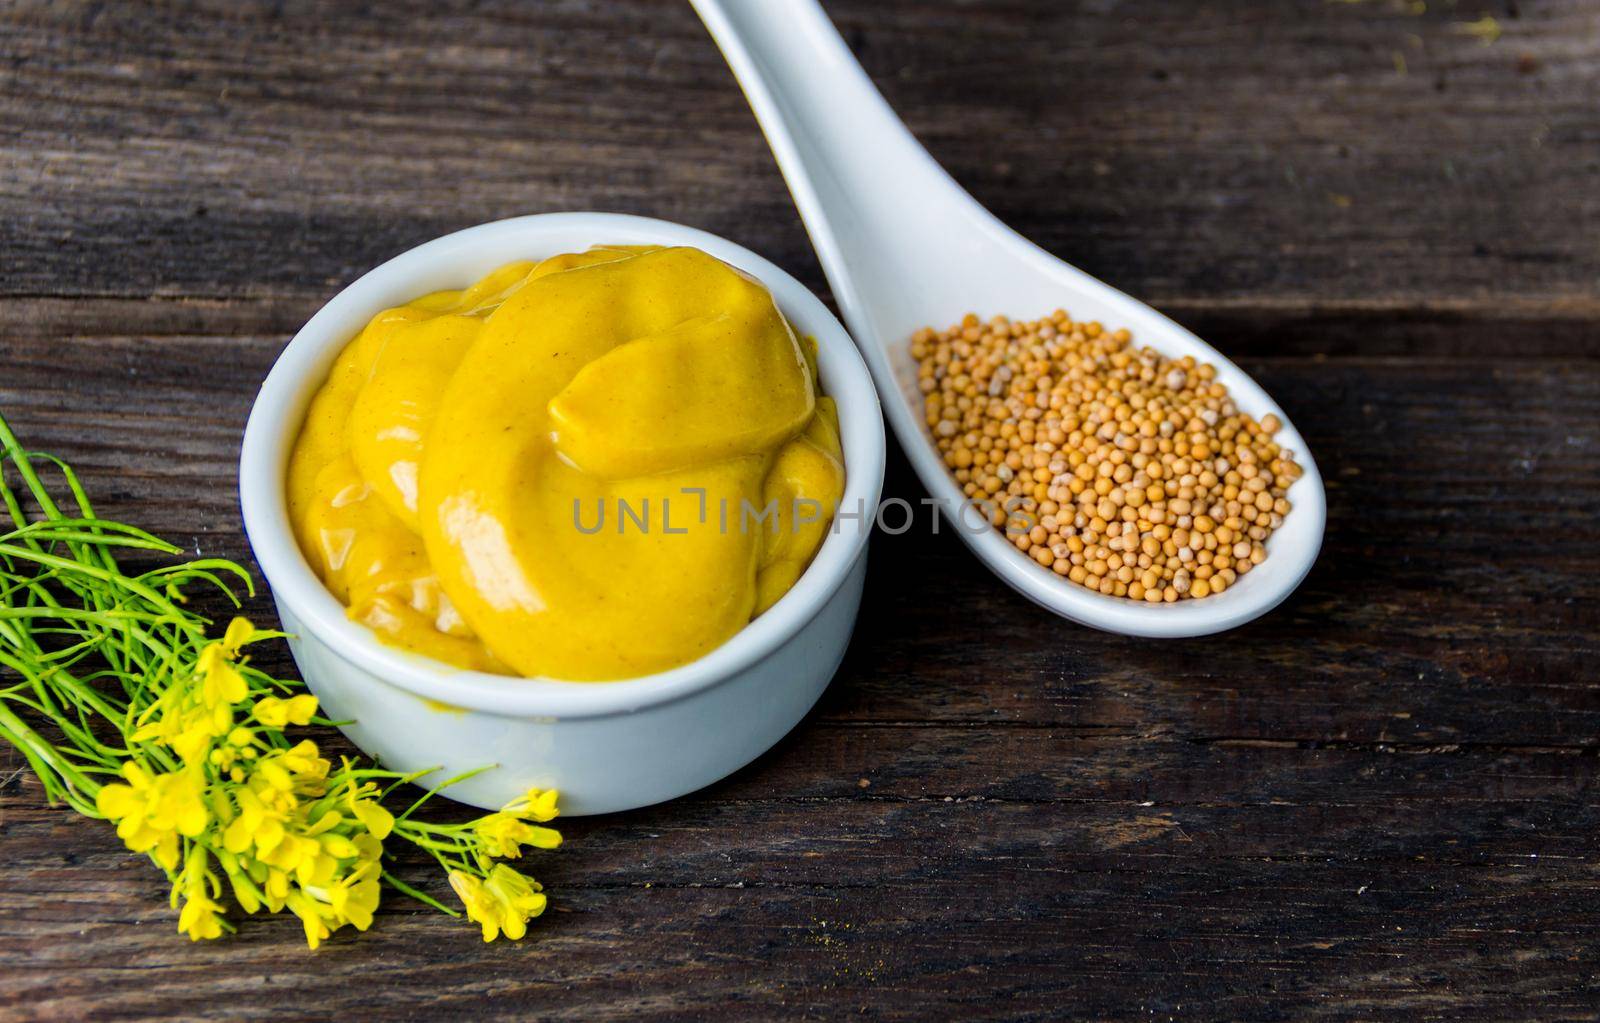 mustard sauce and flowers and their ingredients by GabrielaBertolini